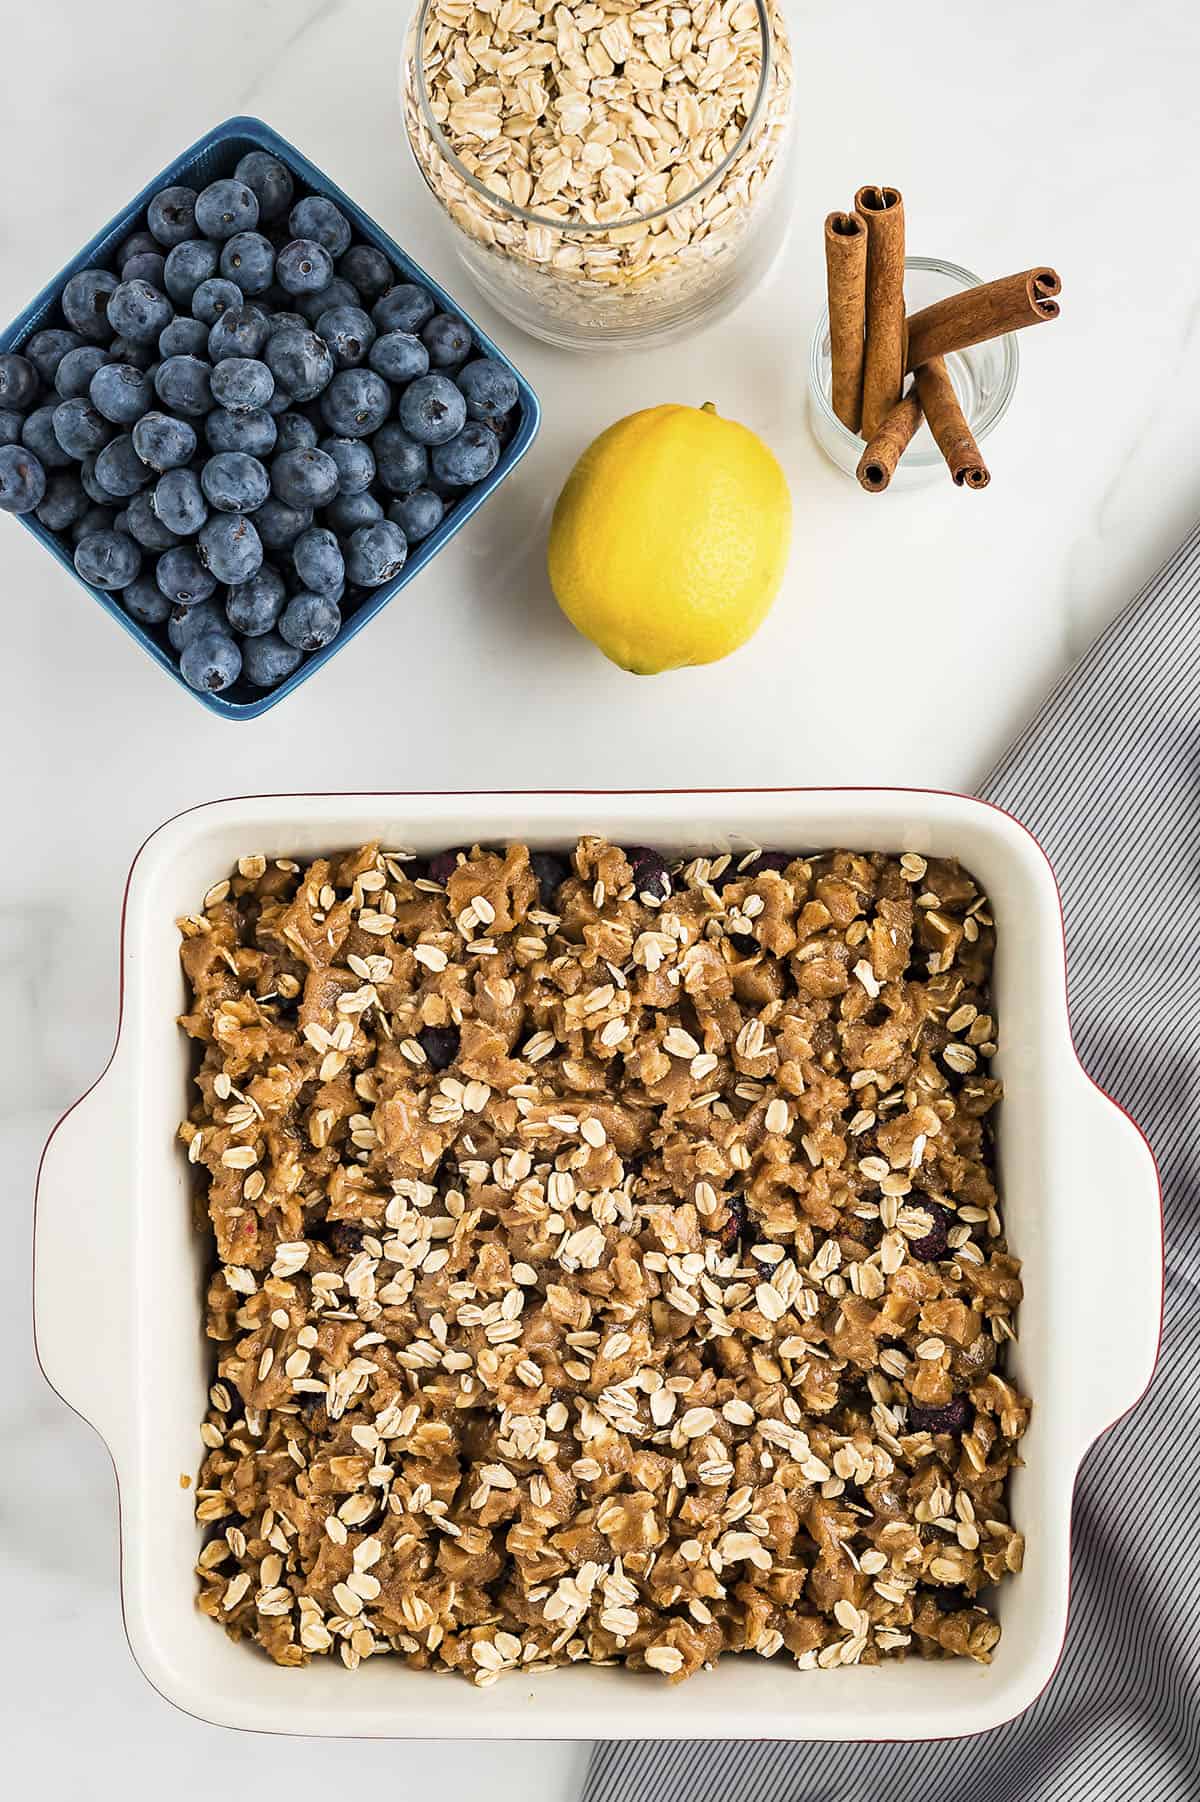 Oat topping over blueberry filling in baking dish.